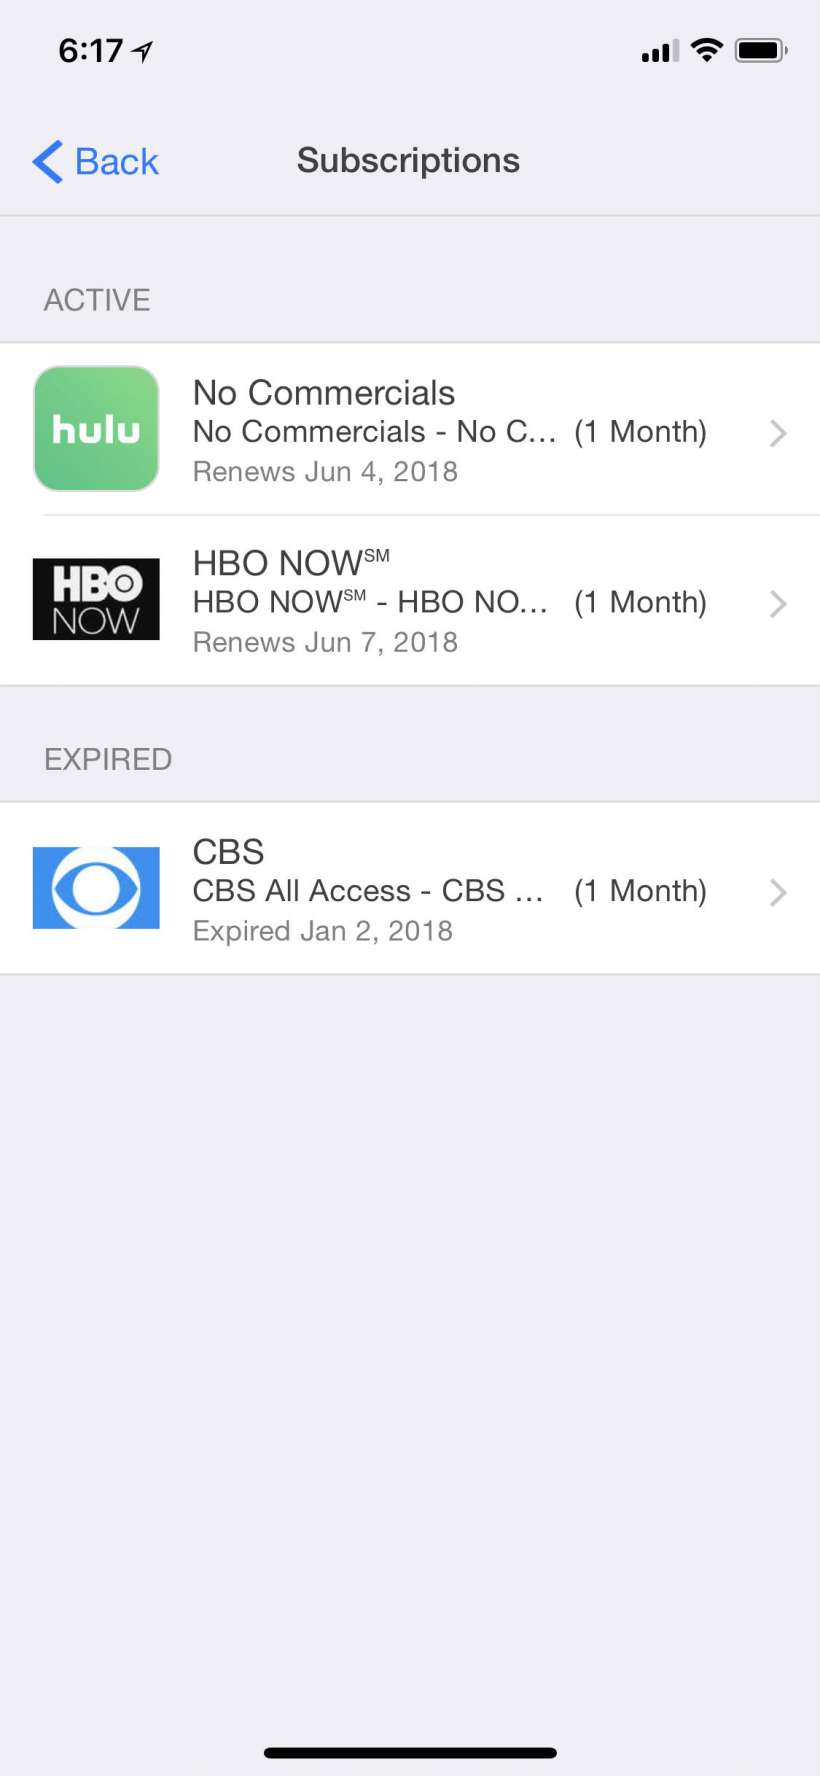 How to manage and cancel Netflix, Hulu, newspaper, magazine, Spotify, music and video iTunes subscriptions on iPhone and iPad.